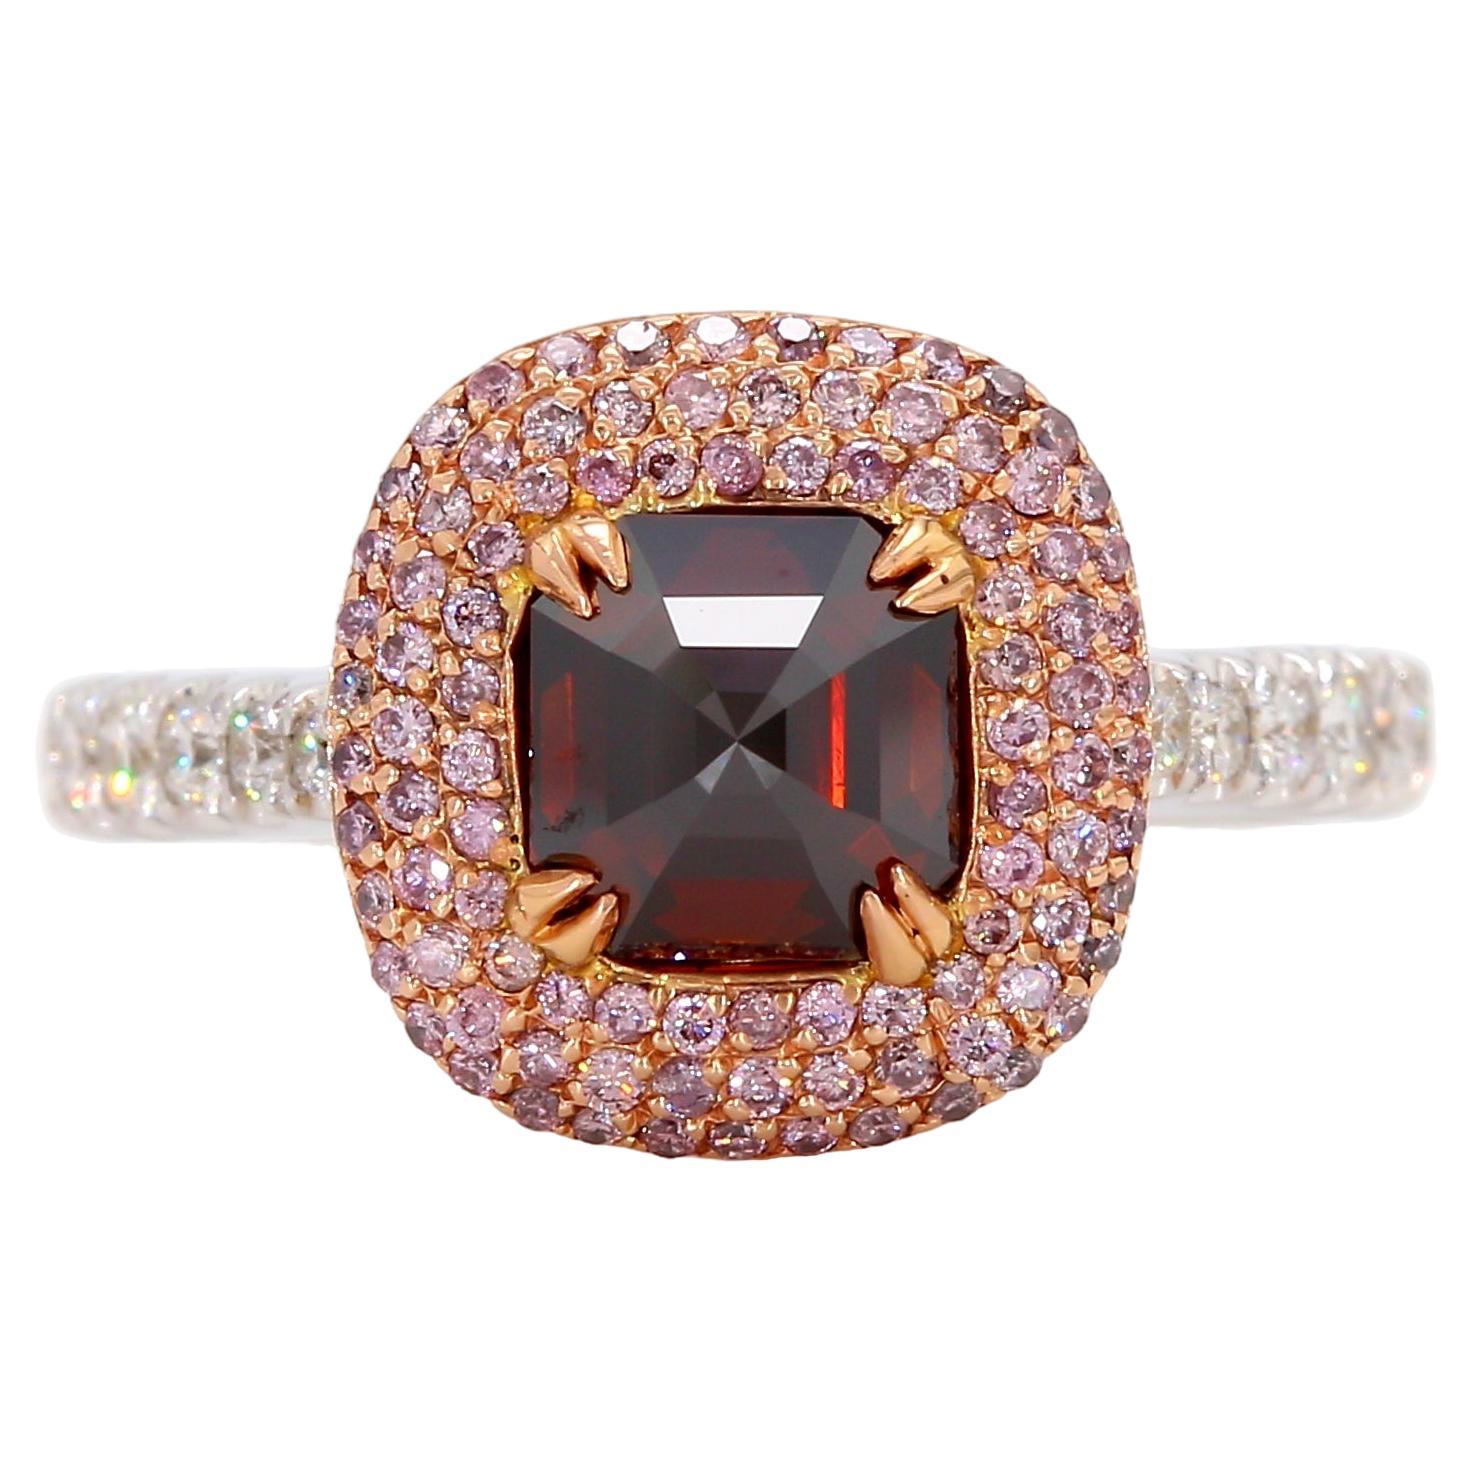 1 + Carart Fancy Red-Brown Diamond Engagement Ring, GIA Certified, 18K Gold.